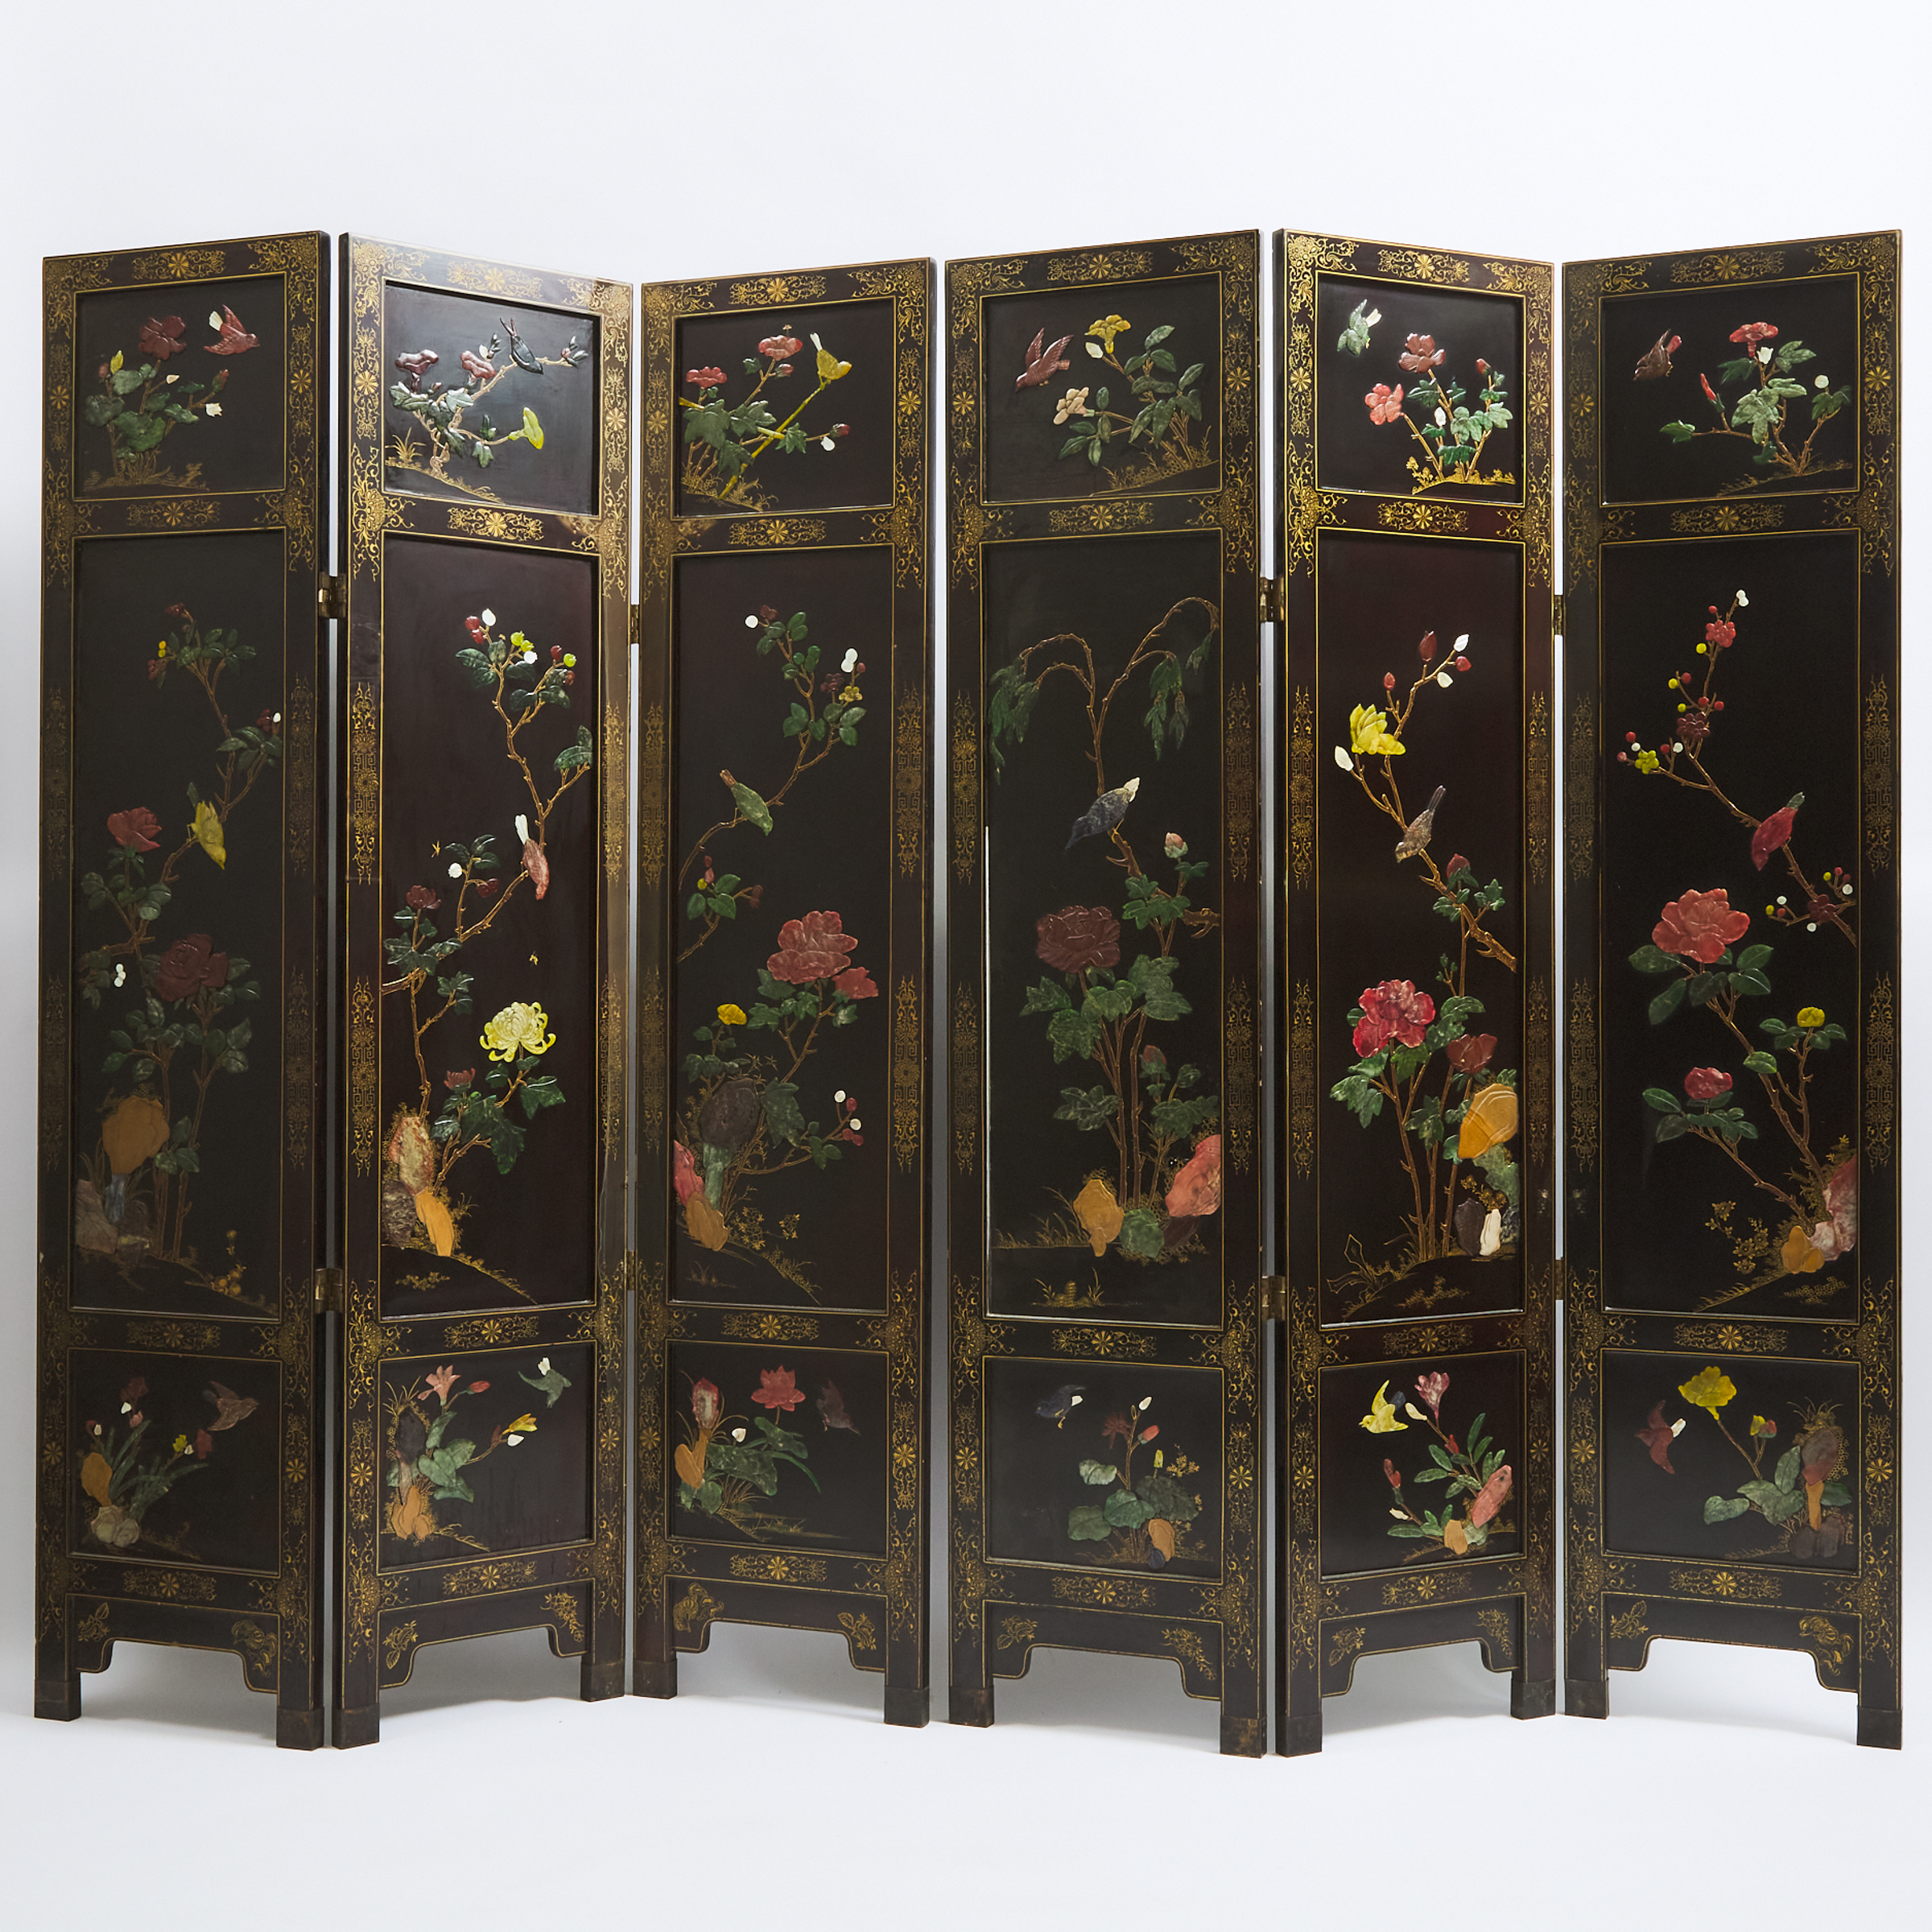 A Chinese Hardstone-Inlaid Six-Panel